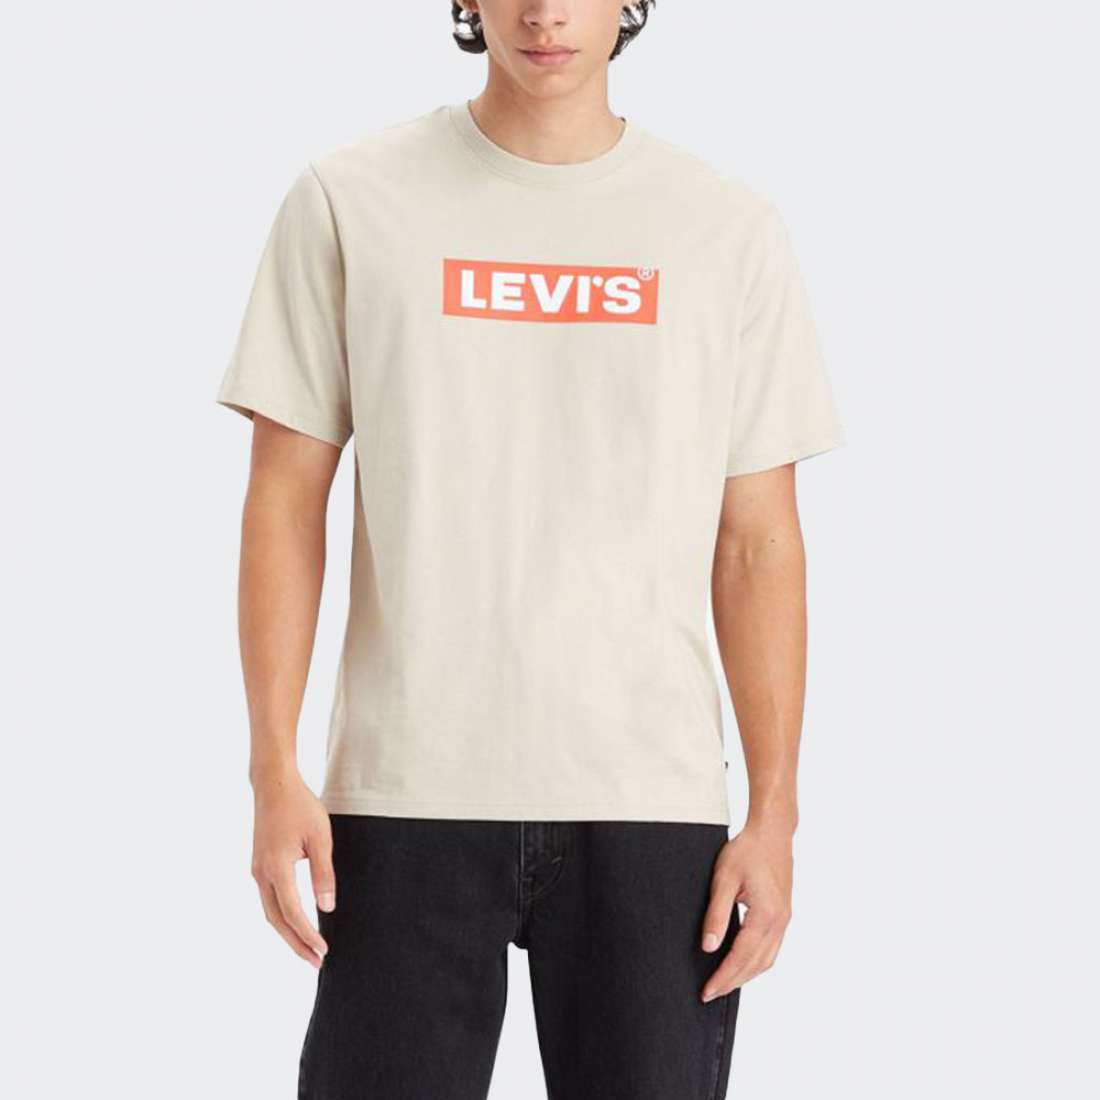 Grupo Lpoint® - Tshirt Levis Relaxed Fit Feather 16143-1298